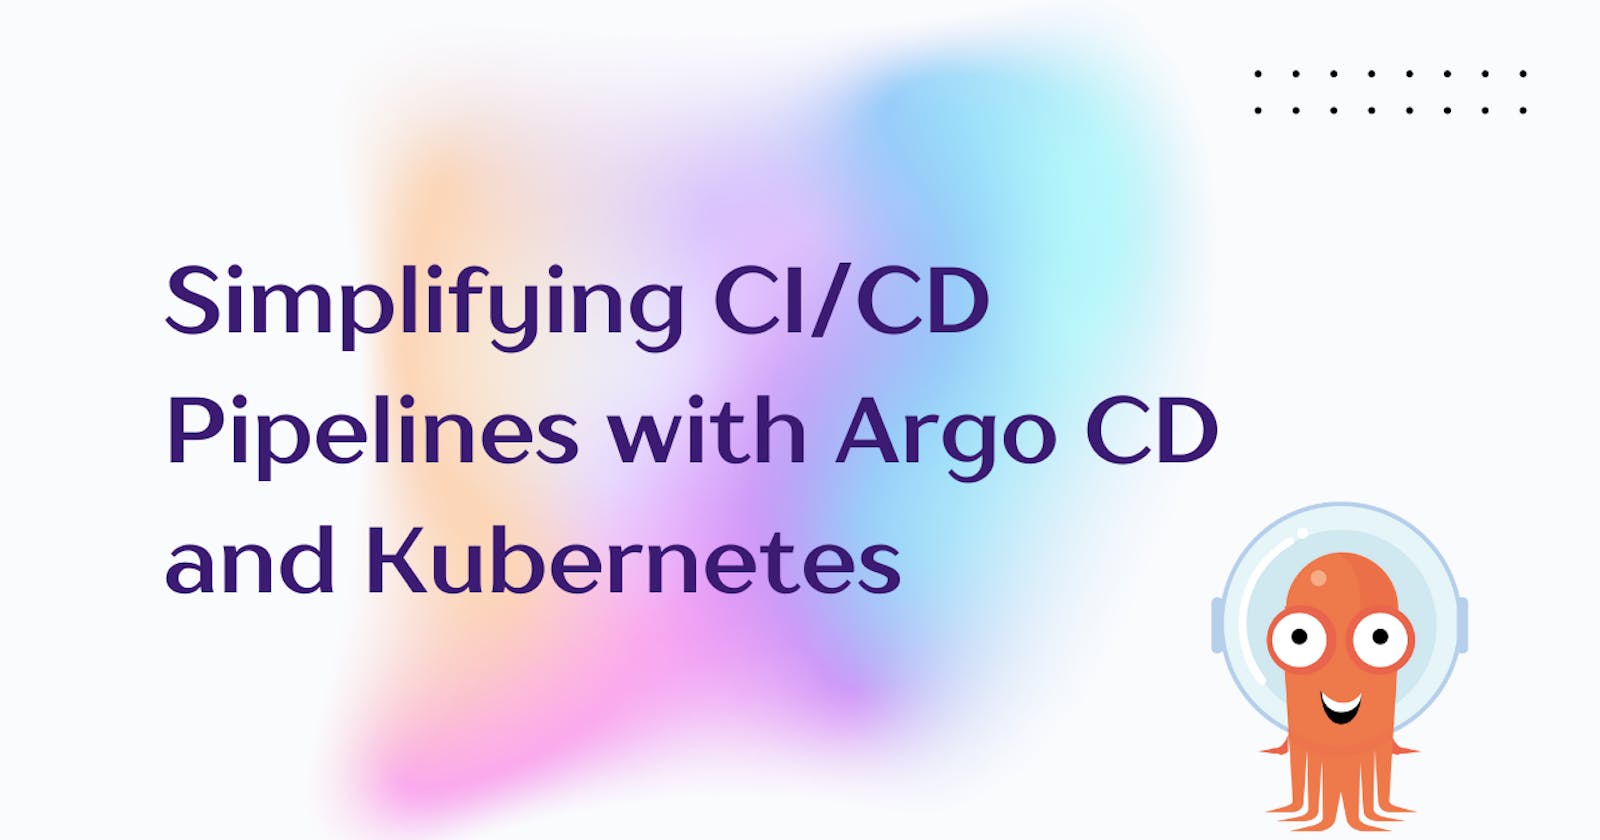 Simplifying CI/CD Pipelines with Argo CD and Kubernetes